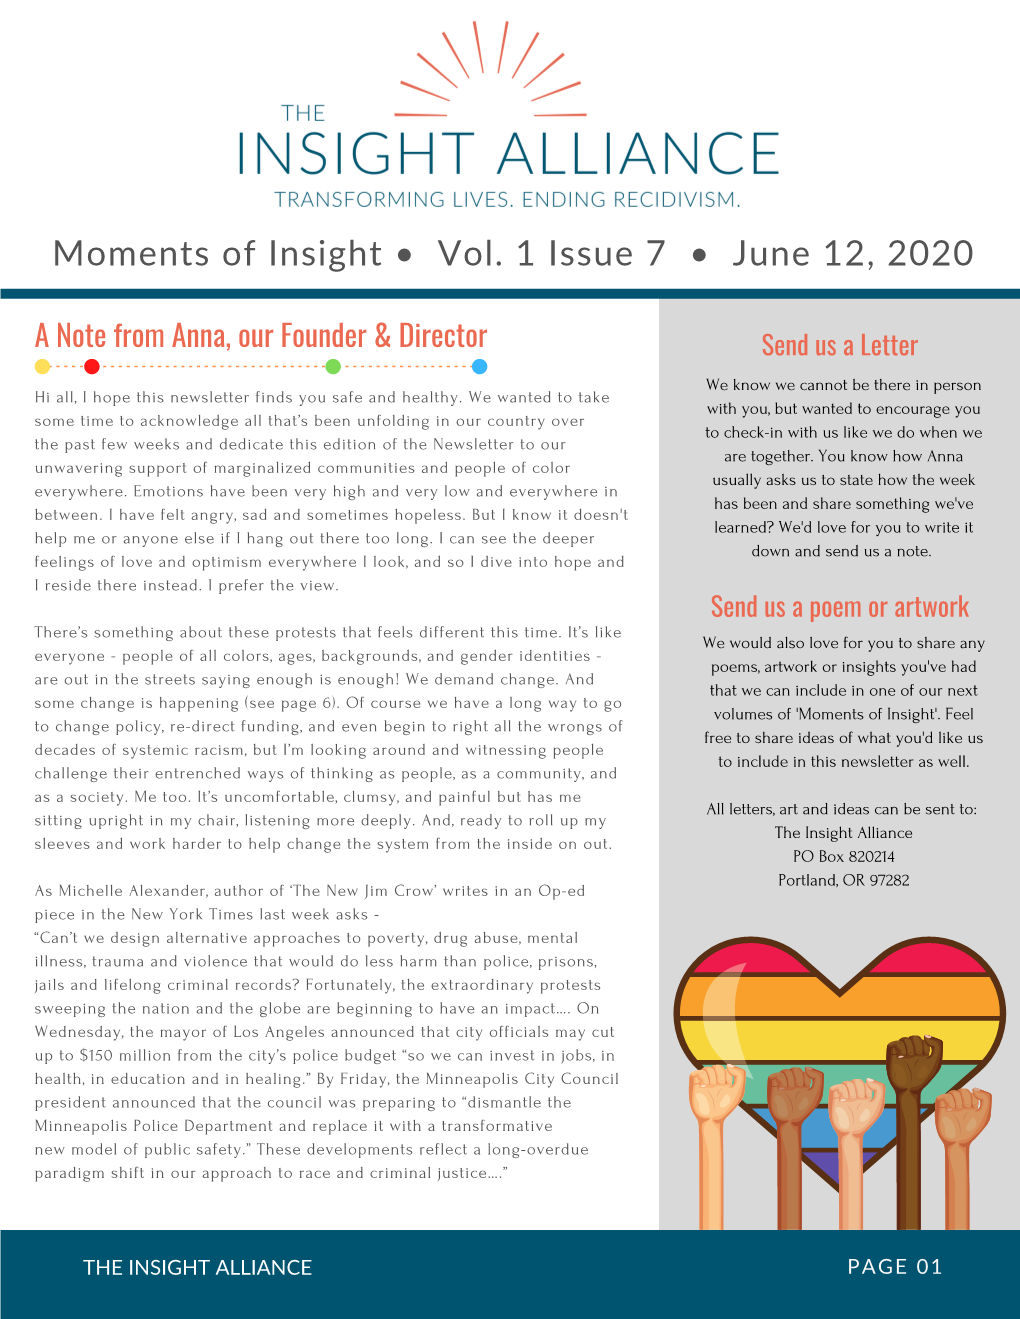 The Insight Alliance Newsletter Vol. 1 Issue 7 Full Color